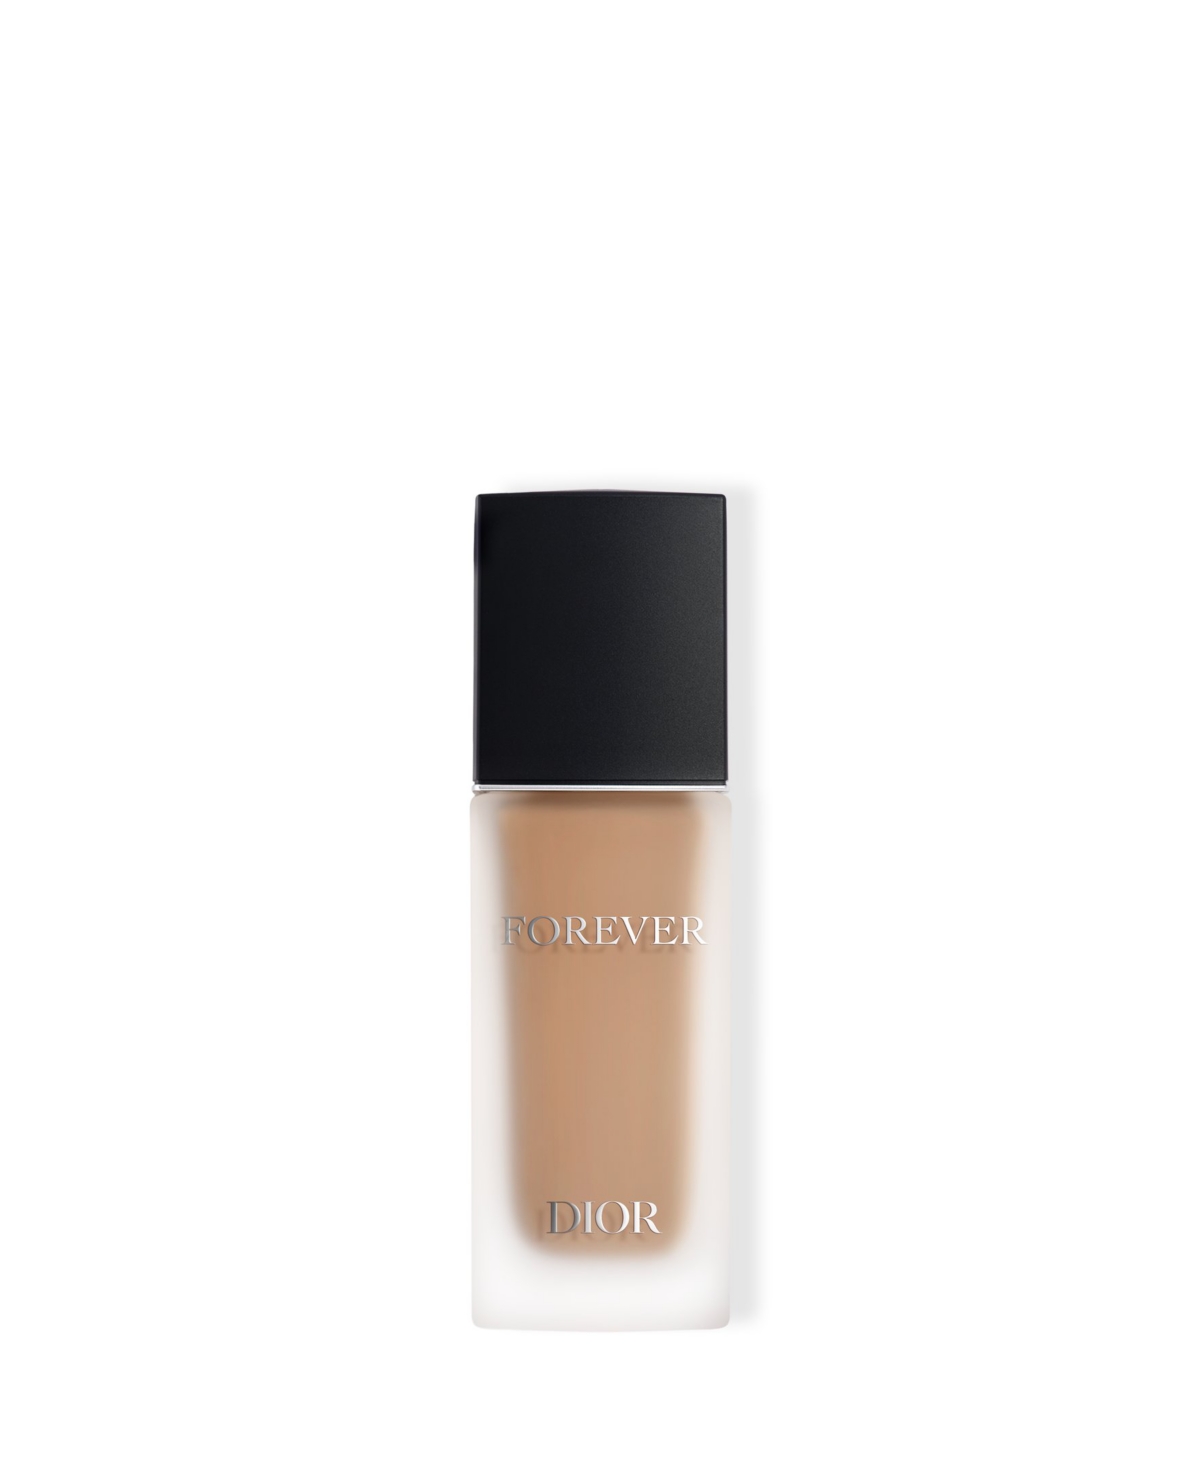 Dior Forever Matte Skincare Foundation Spf 15 In . Neutral (light Skin With Neutral Under